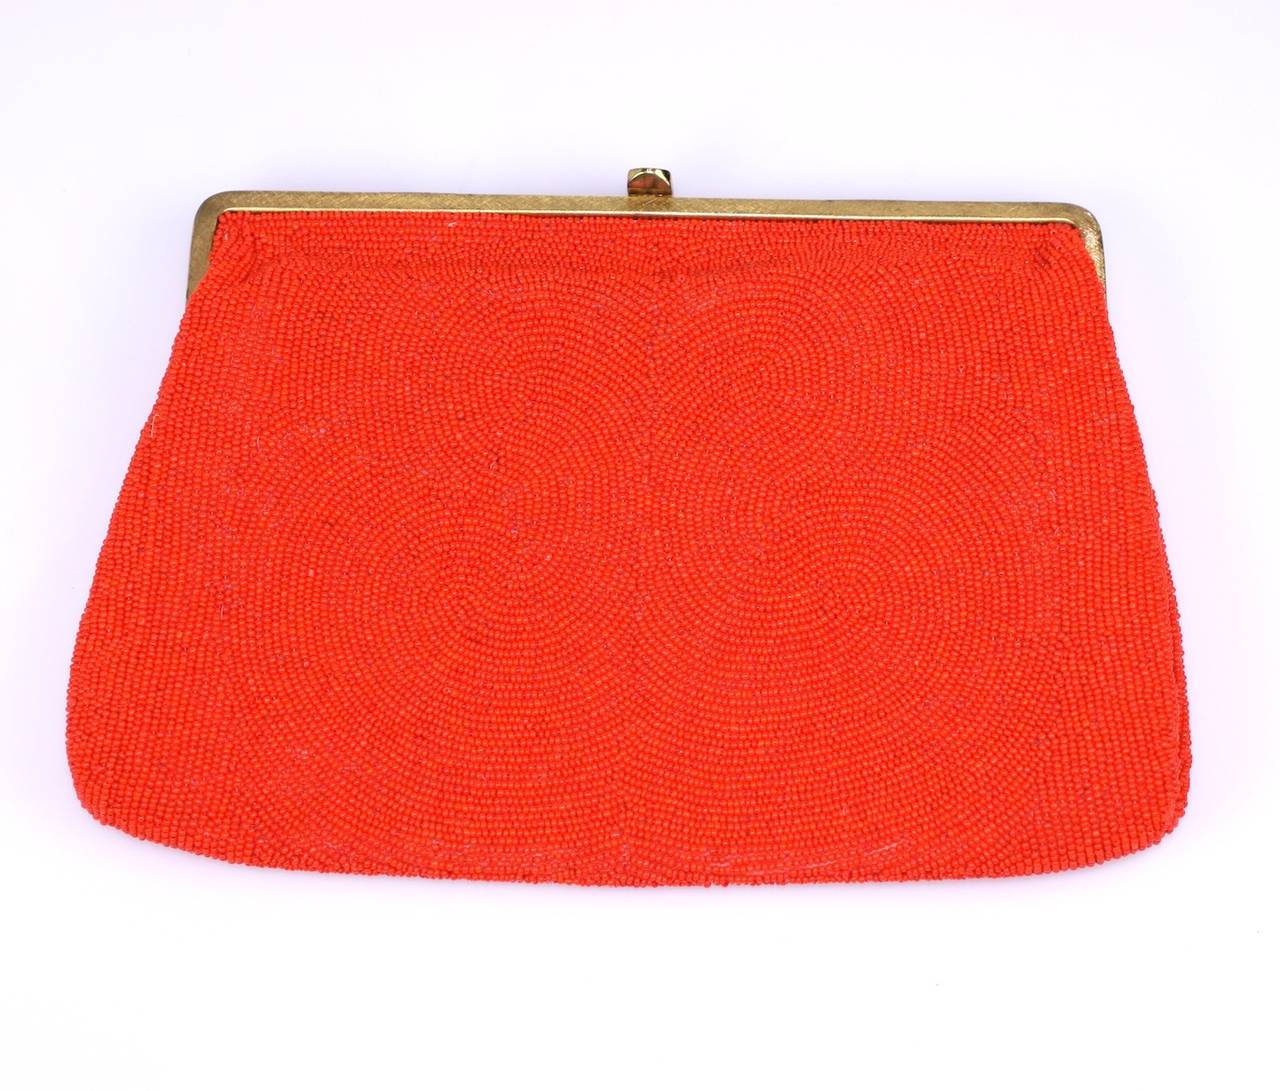 Vivid orange caviar beaded bag, Walborg, Belgium. Can be used as clutch or can also be used with retractable handle as well. Perfect when a burst of color is called for.
9